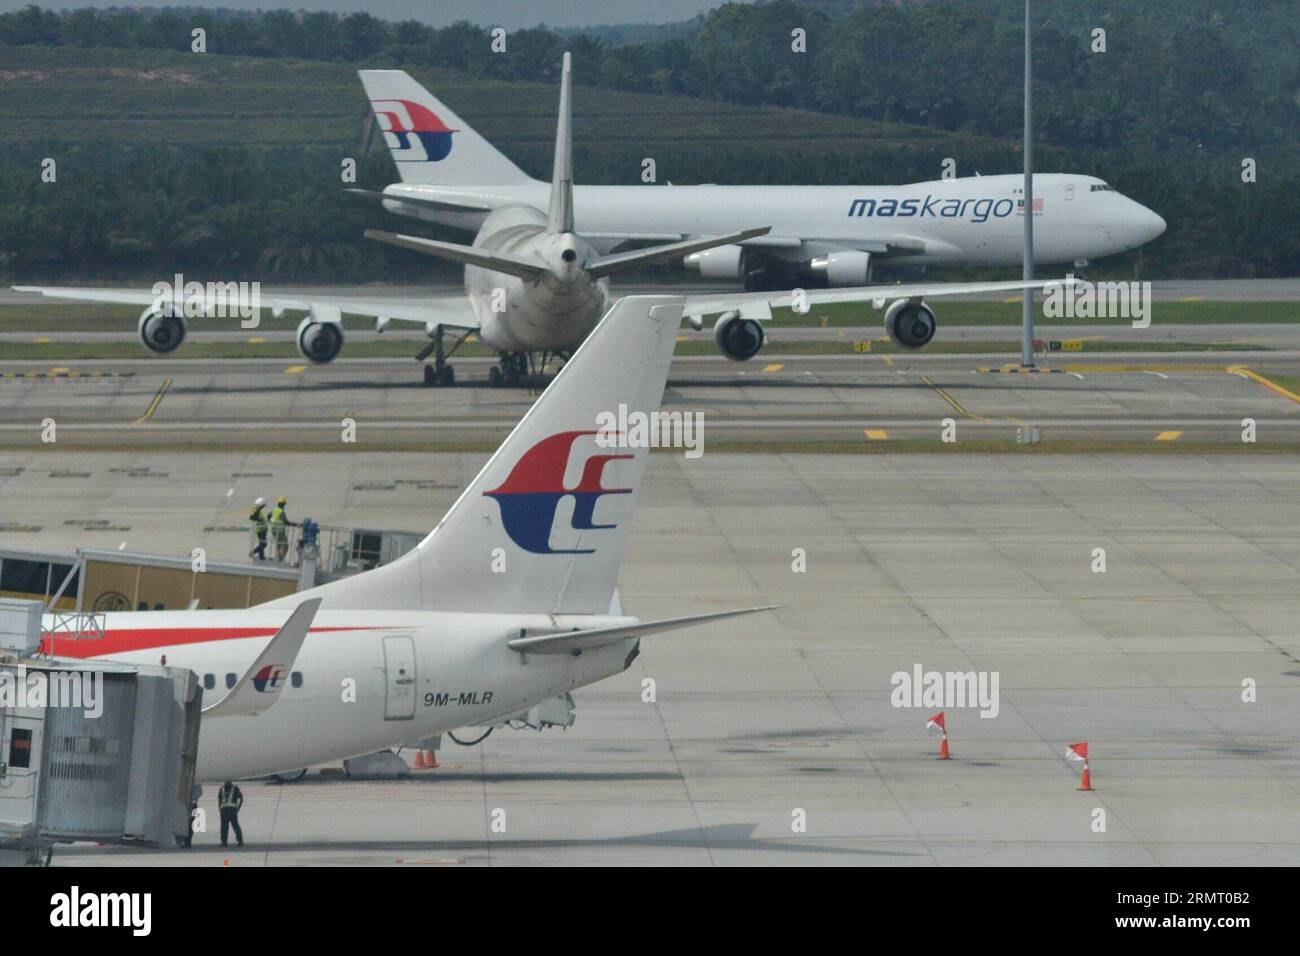 (140808) -- KUALA LUMPUR, Aug. 8, 2014 -- Malaysia Airlines flights are seen parking at the Kuala Lumpur International Airport in Kuala Lumpur, Malaysia, Aug. 8, 2014. Khazanah Nasional Bhd, Malaysia Airlines (MAS) largest shareholder, said on Friday that it sought to delist the national carrier to facilitate its plan to undertake a comprehensive review and restructuring of MAS. ) MALAYSIA-MAS-KHAZANAH NASIONAL BHD-DELIST ChongxVoonxChung PUBLICATIONxNOTxINxCHN   Kuala Lumpur Aug 8 2014 Malaysia Airlines Flights are Lakes Parking AT The Kuala Lumpur International Airport in Kuala Lumpur Malays Stock Photo